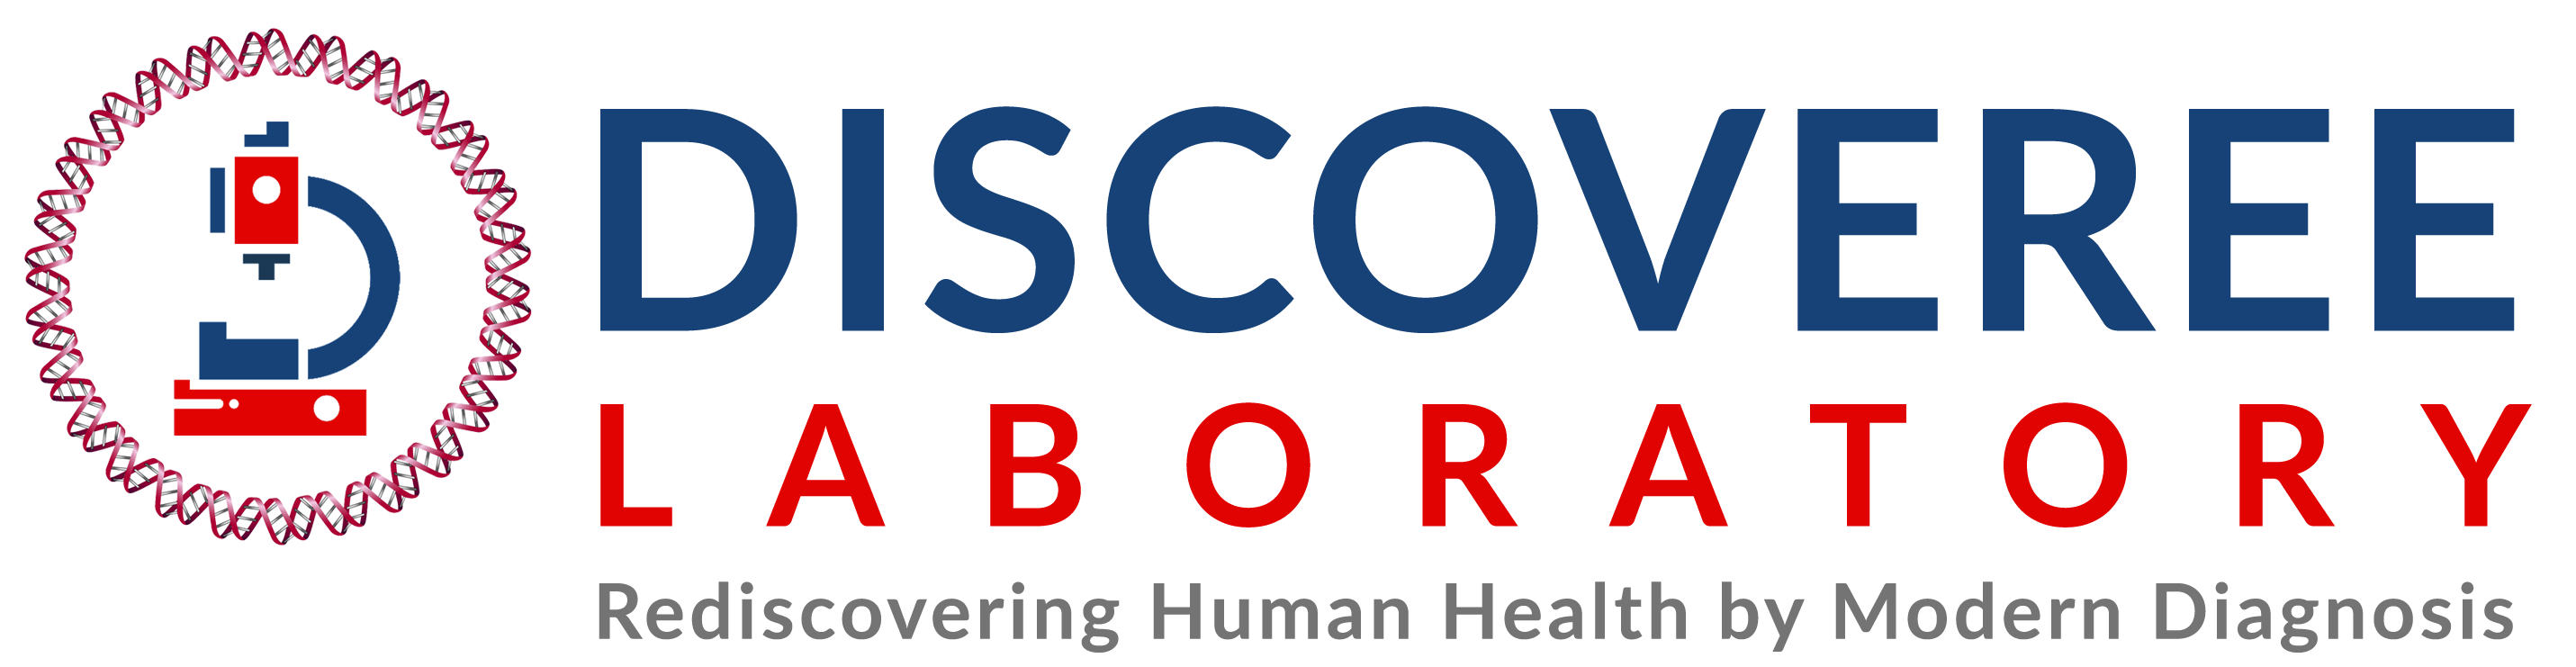 Discoveree laboratory|Hospitals|Medical Services